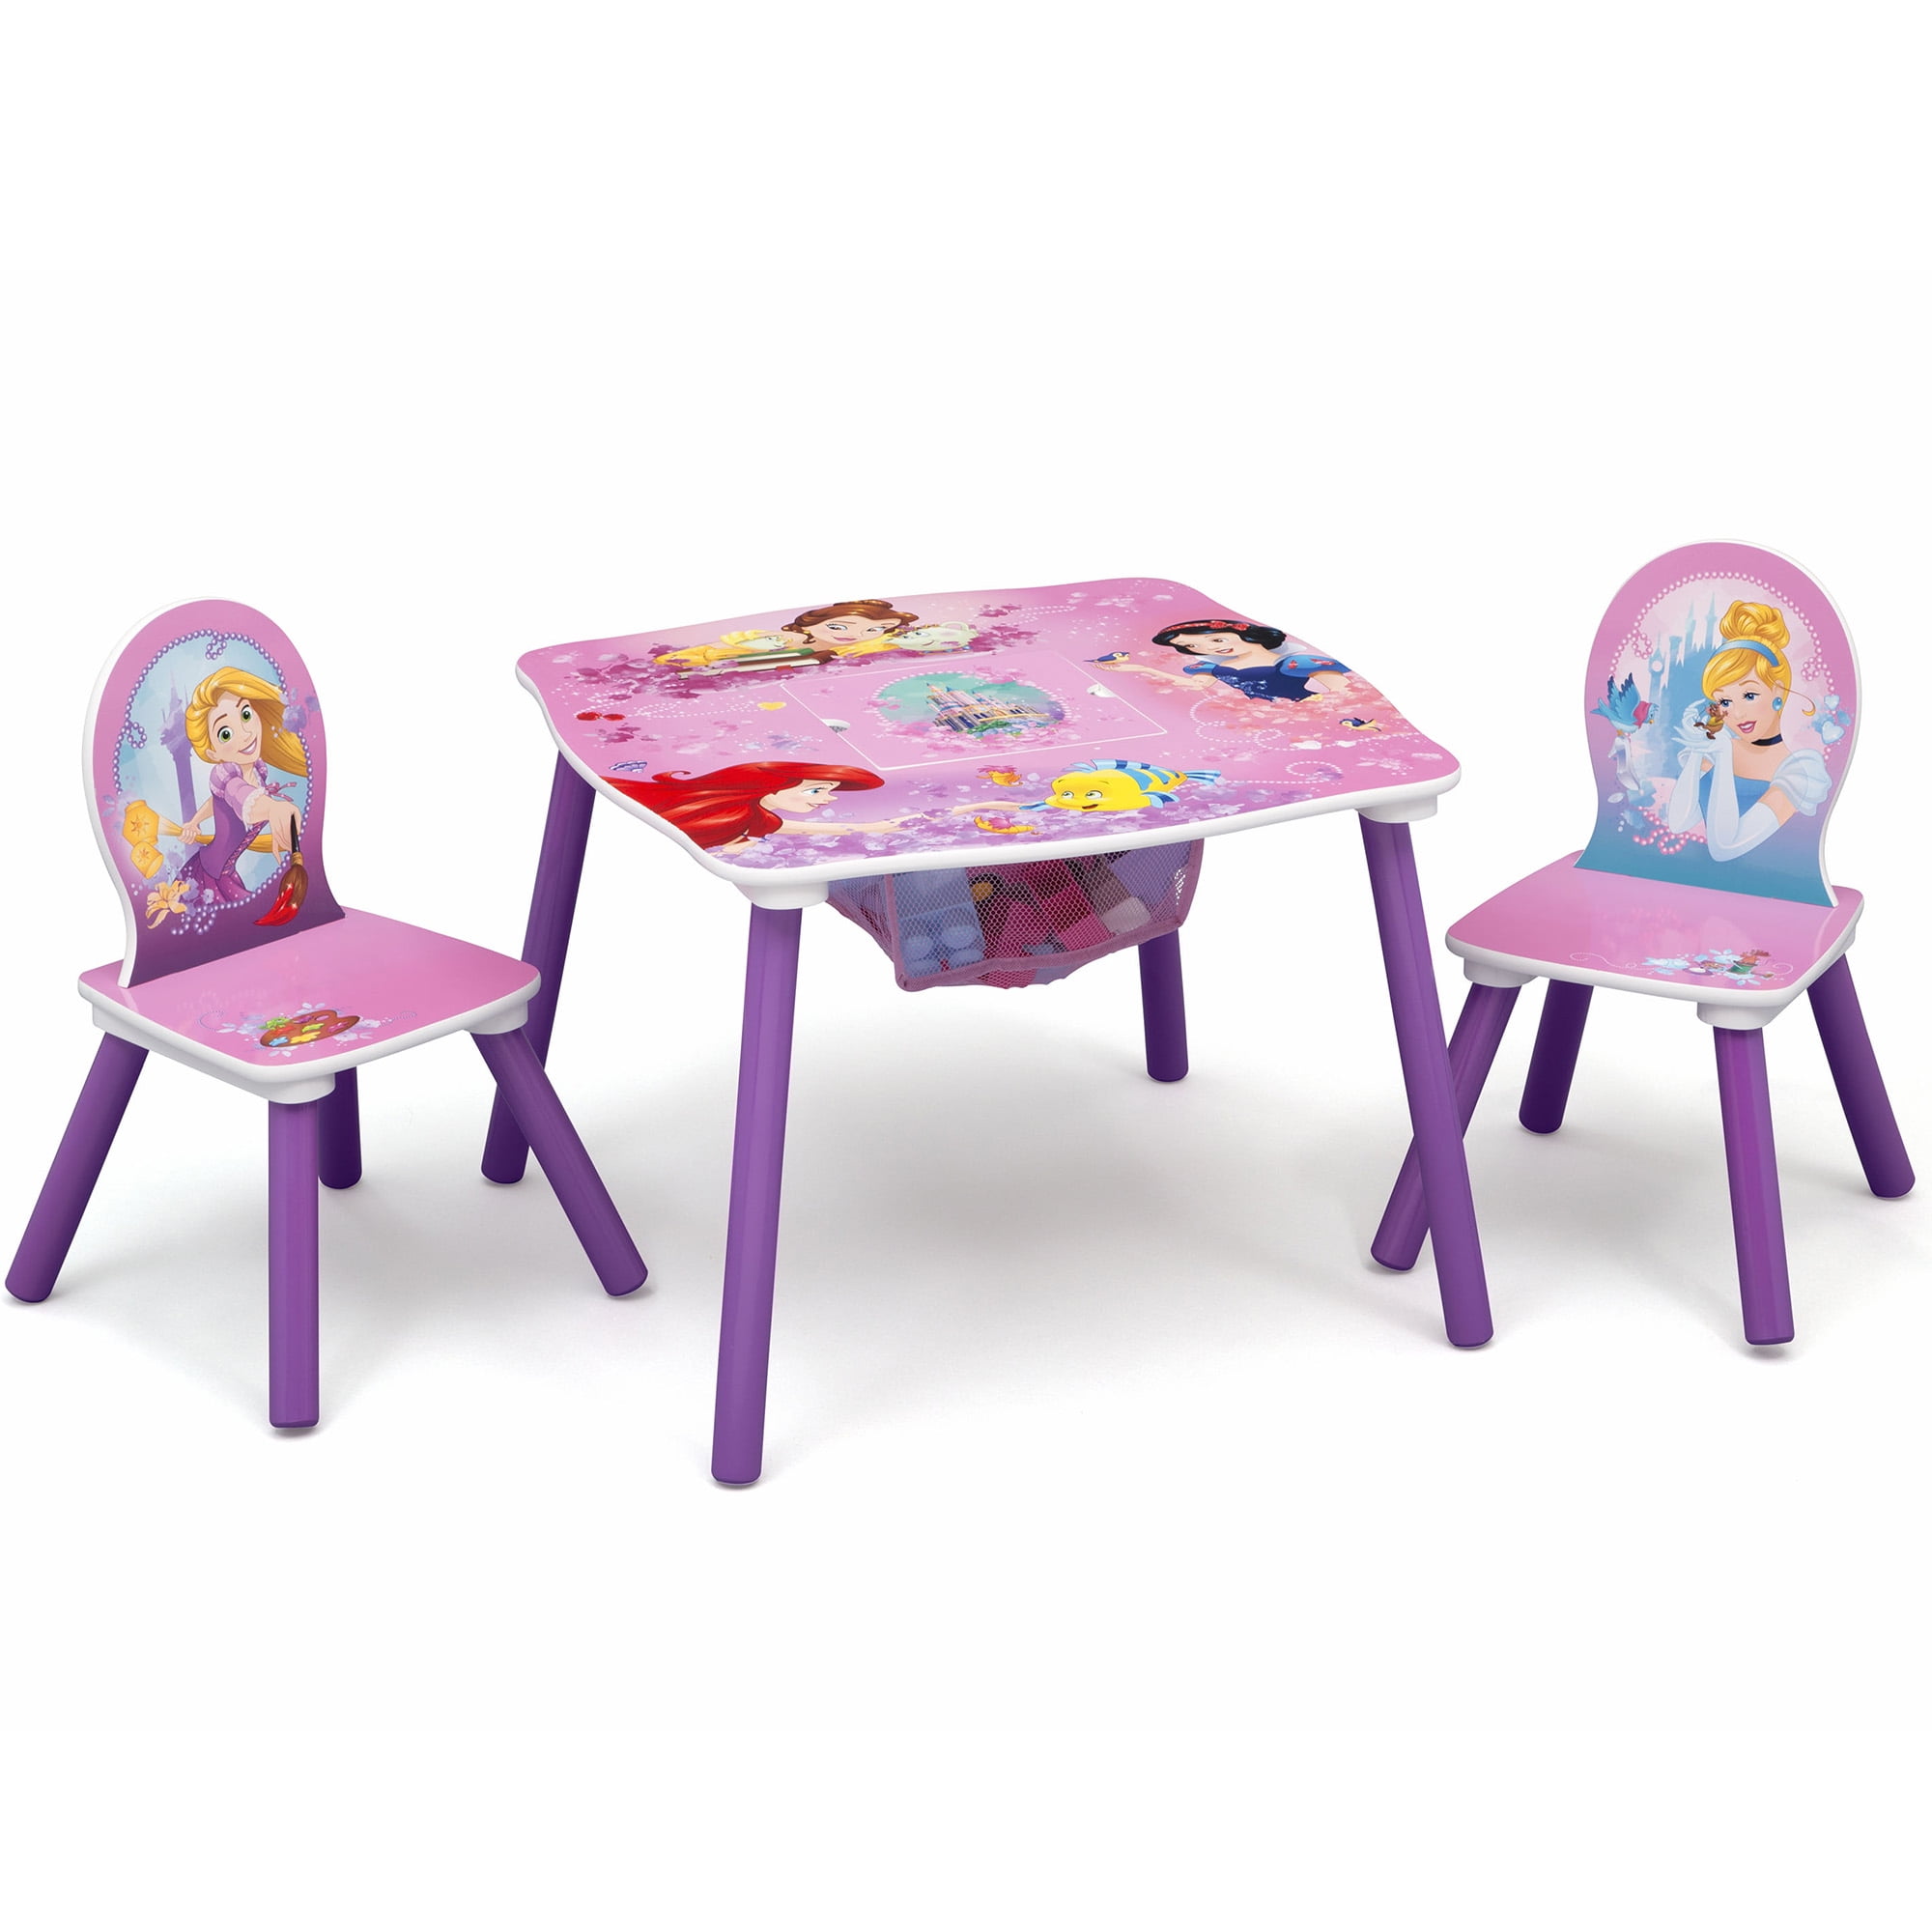 Disney Princess Wood Kids Table and Chair Set with Storage